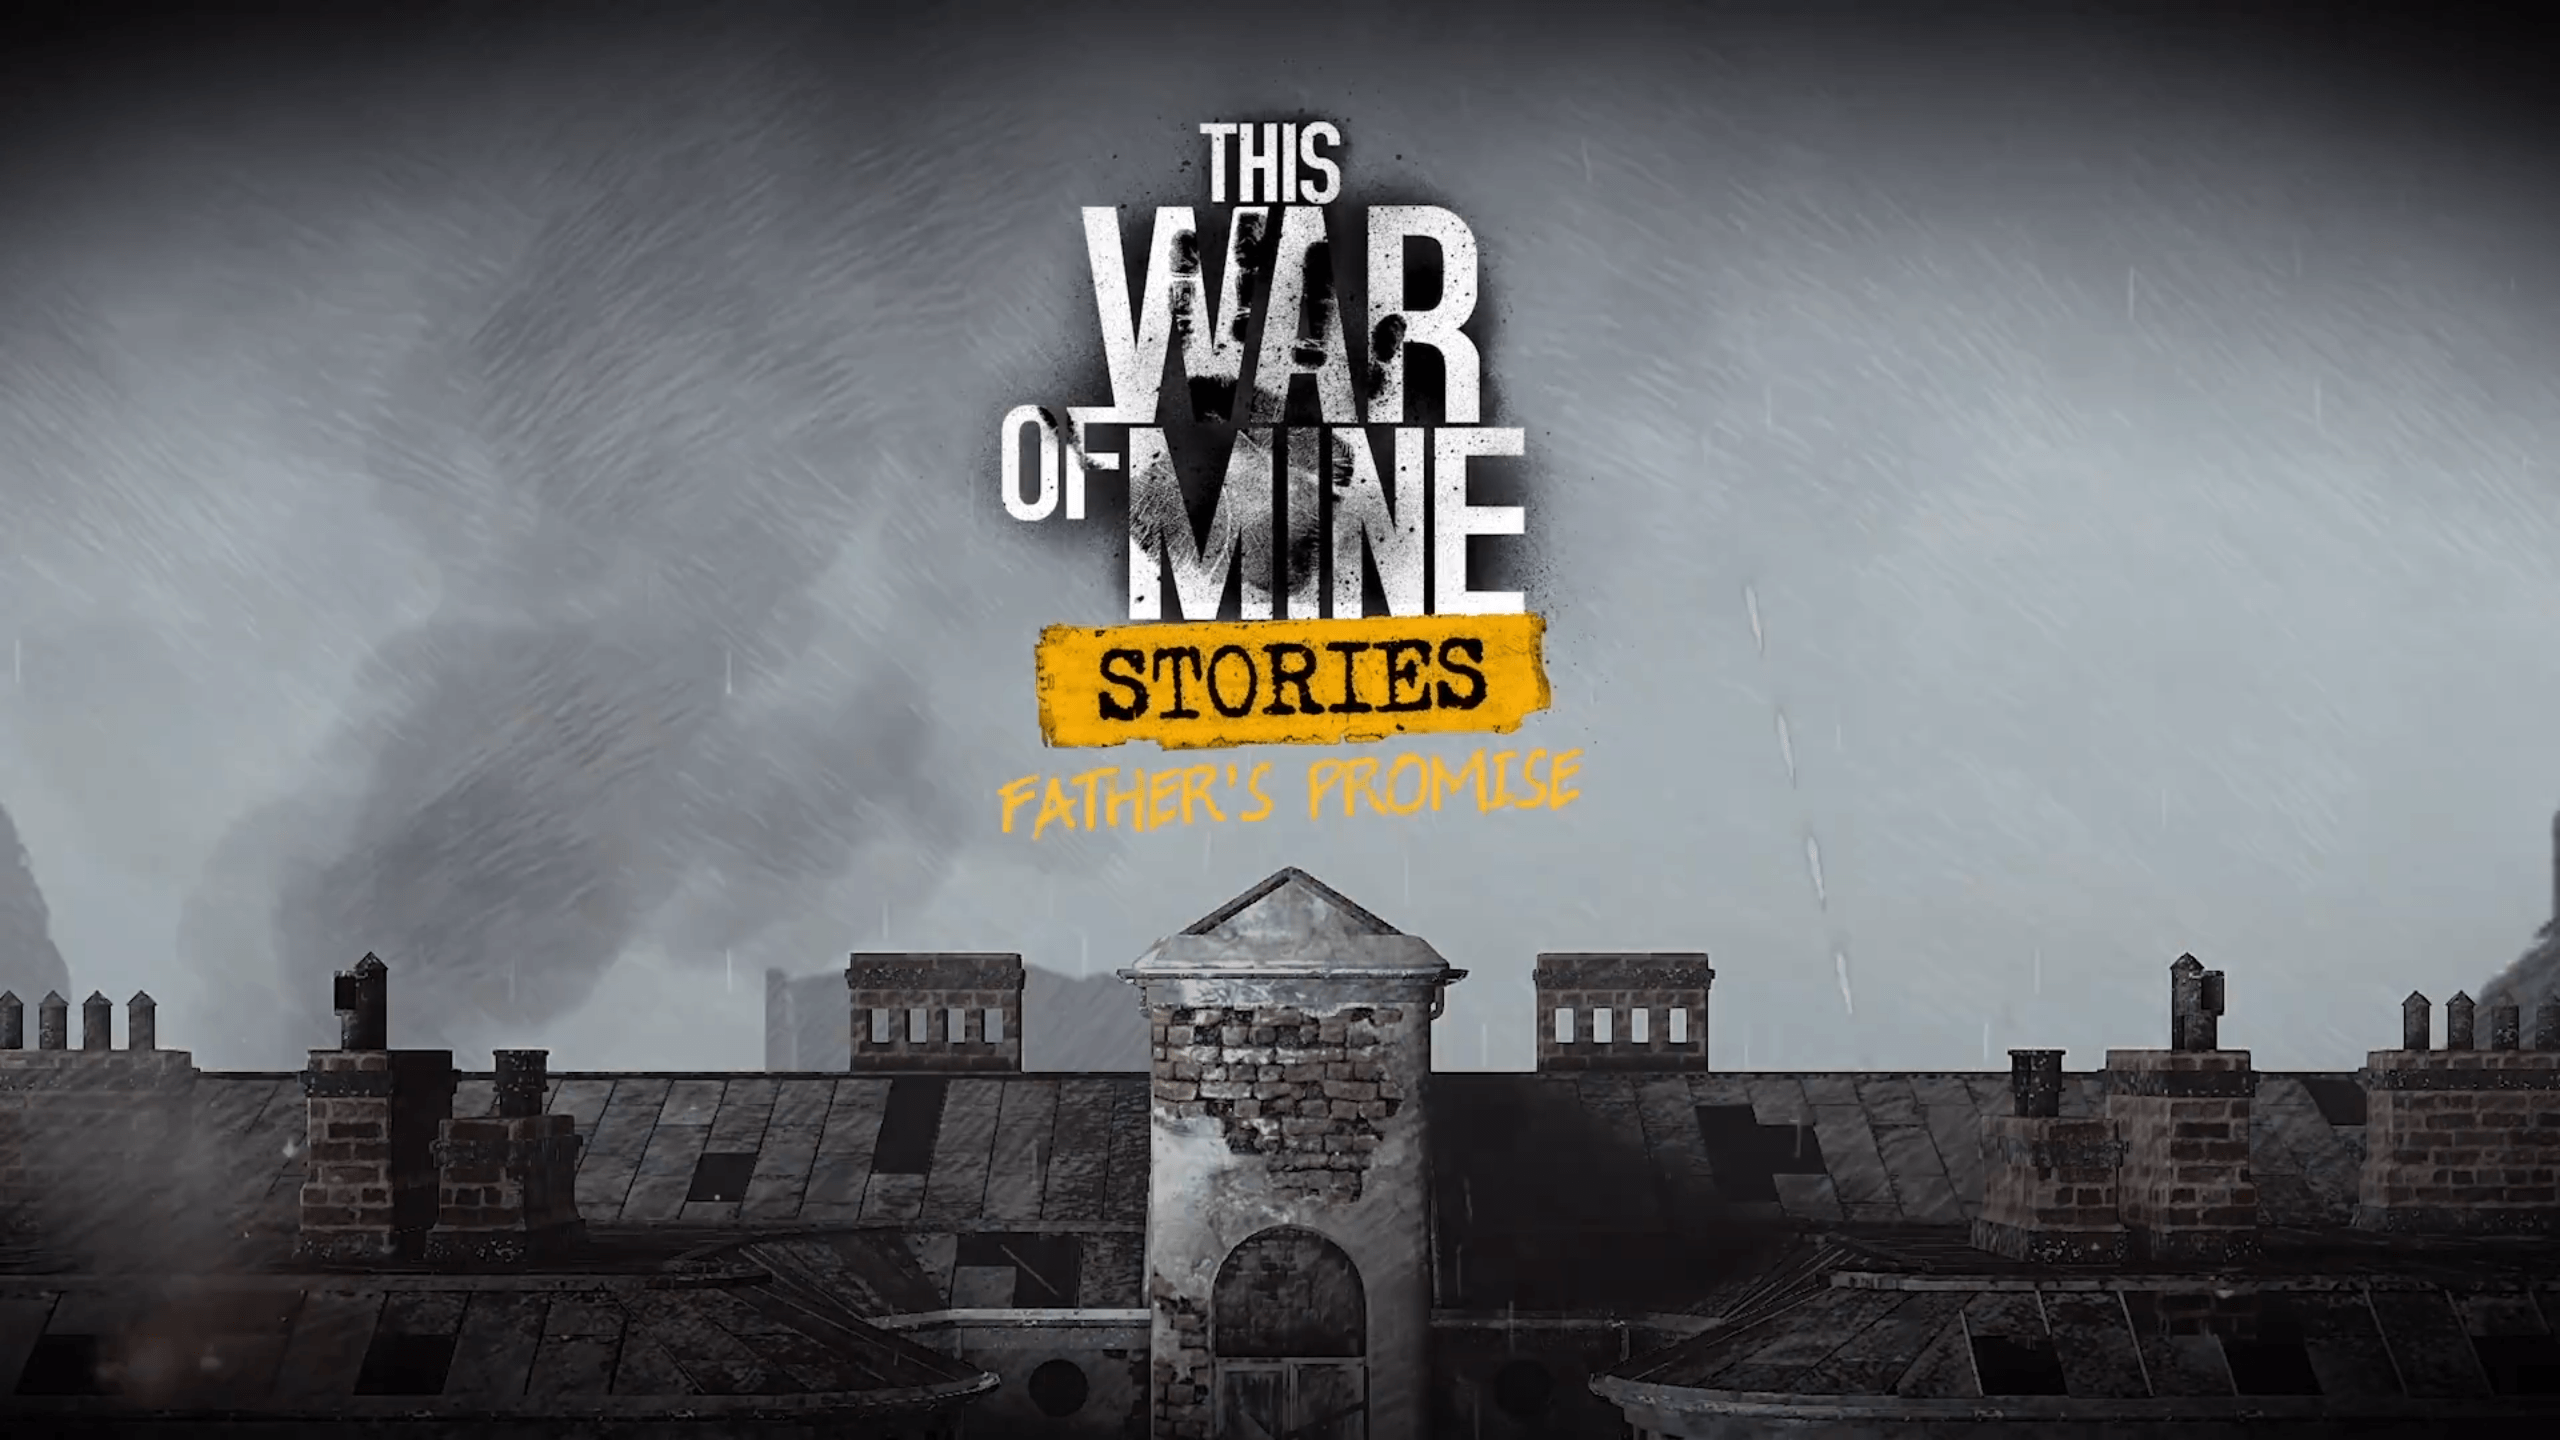 Update: Officially out now This War of Mine: Stories brings